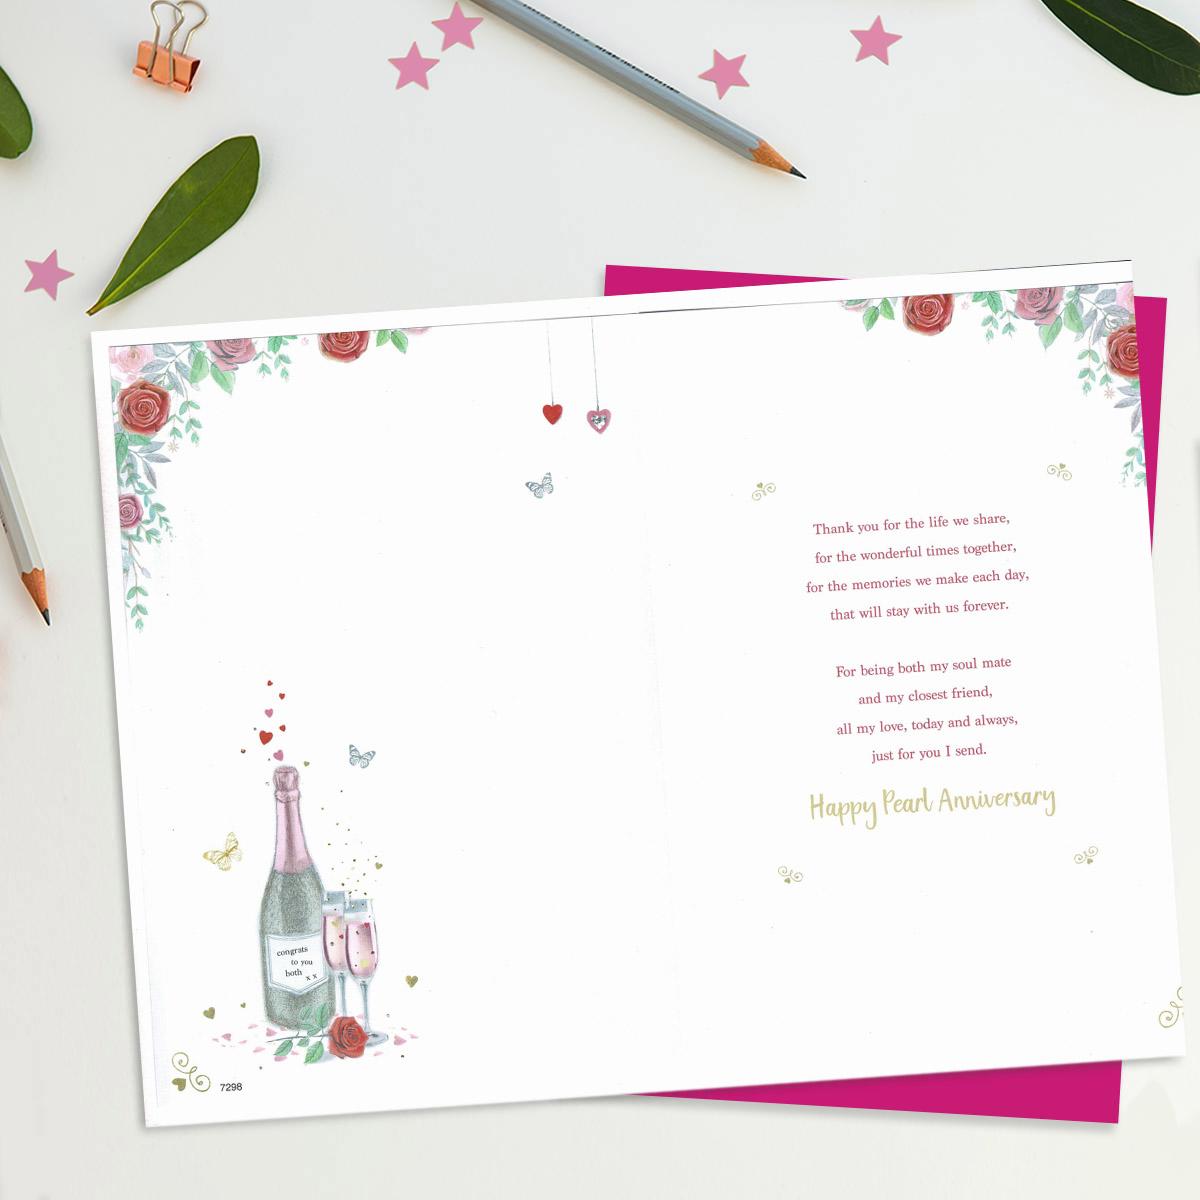 Inside Image Of Wife 30th Anniversary Card Showing Layout And Printed Text